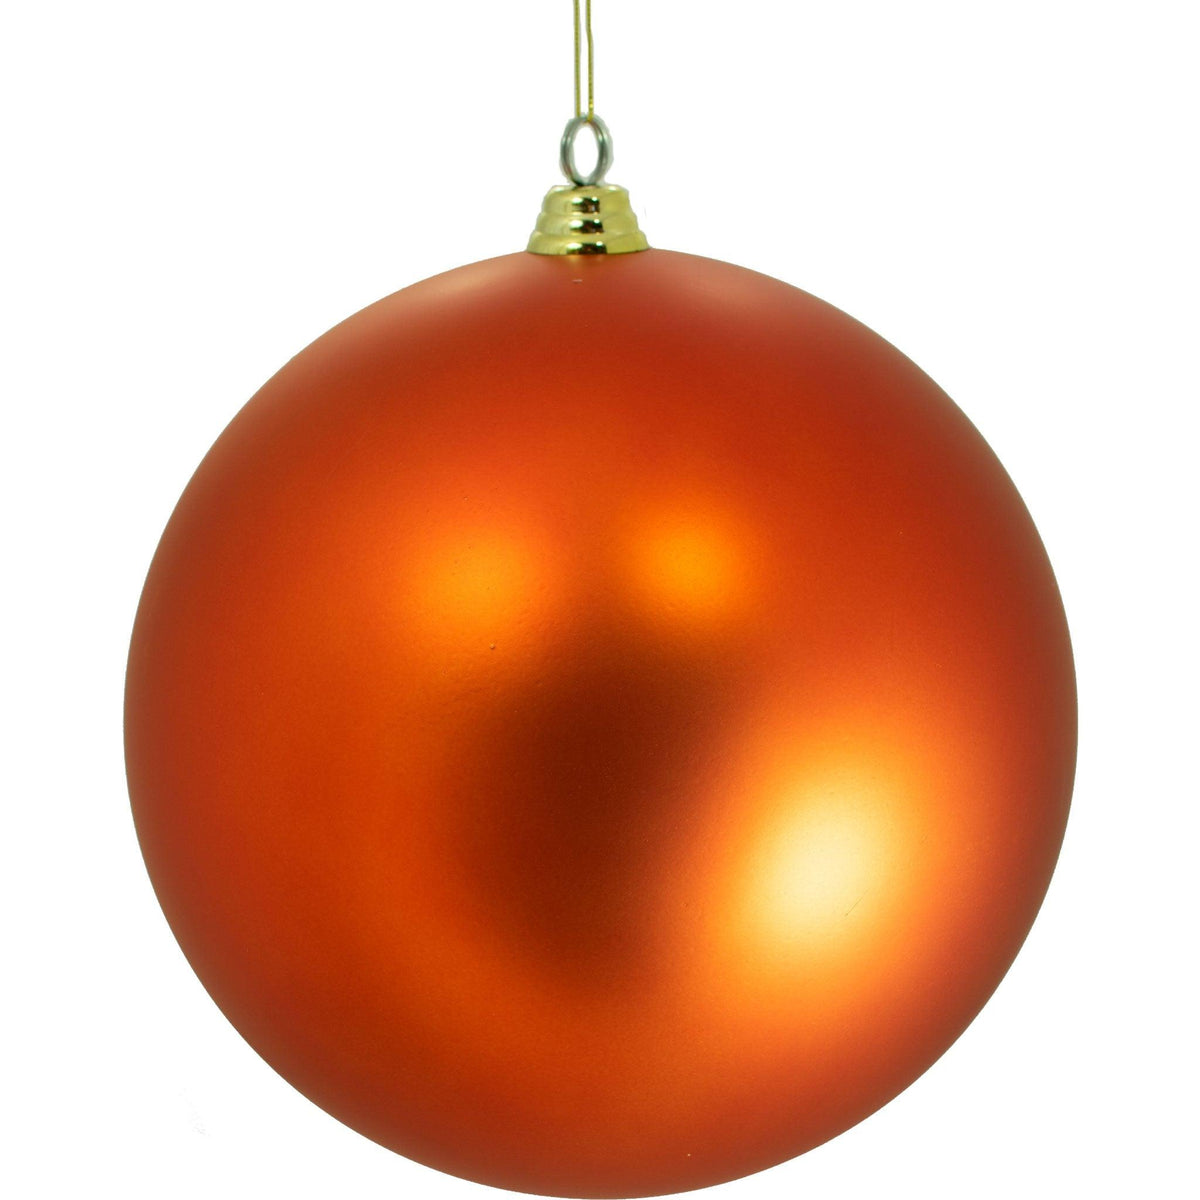 Lee Display offers brand new Shiny Matte Orange Plastic Ball Ornaments at wholesale prices for affordable Christmas Tree Hanging and Holiday Decorating on sale at leedisplay.com